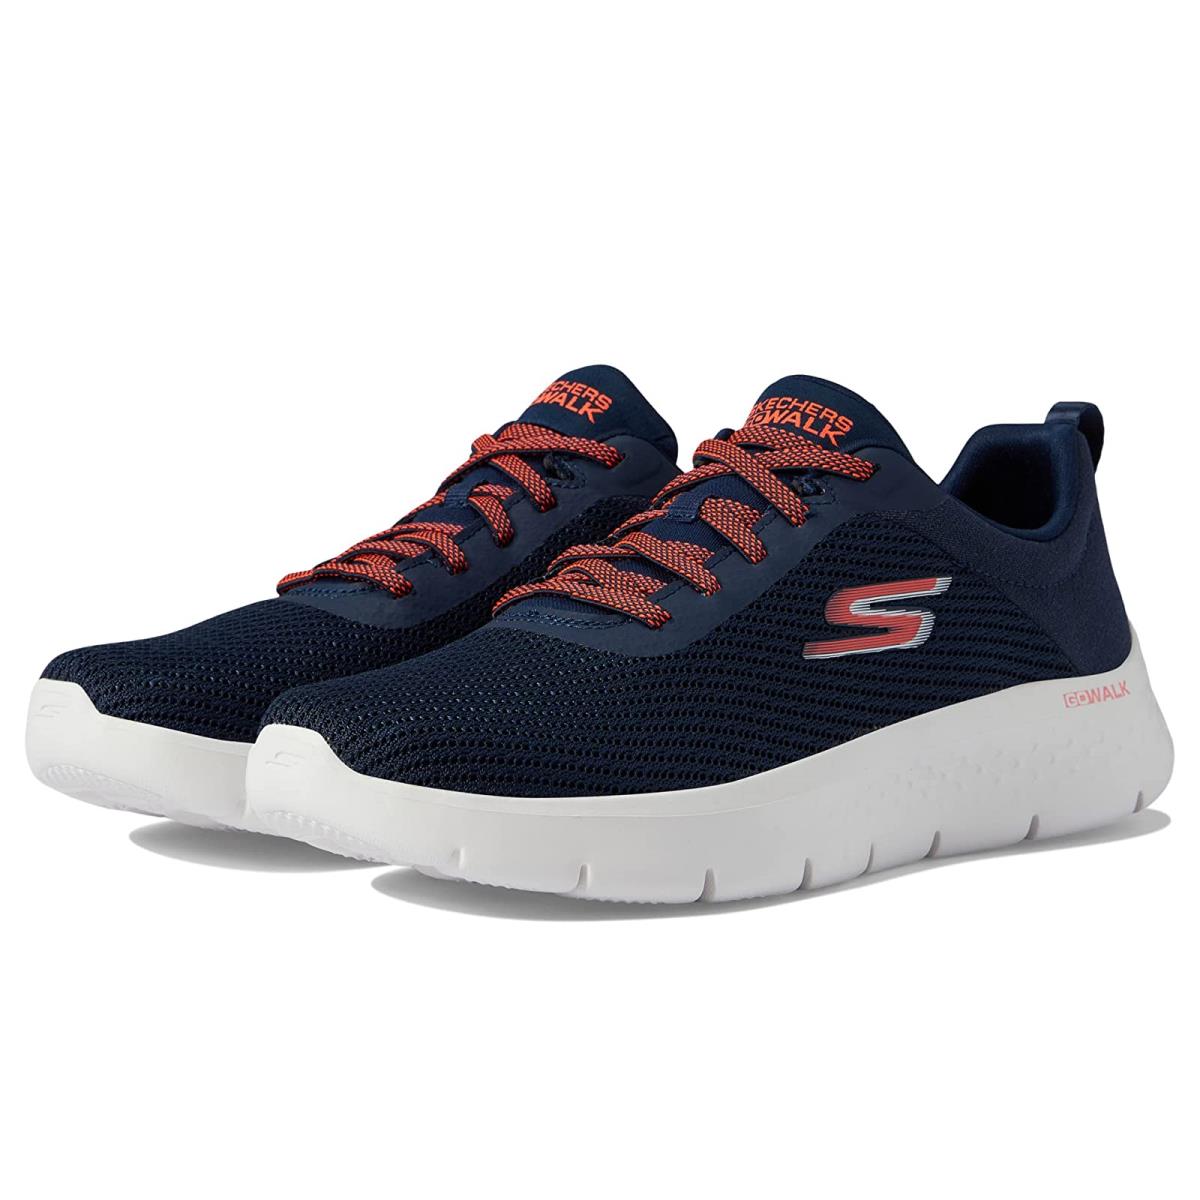 Woman`s Sneakers Athletic Shoes Skechers Performance Go Walk Flex - Alani Navy/Coral